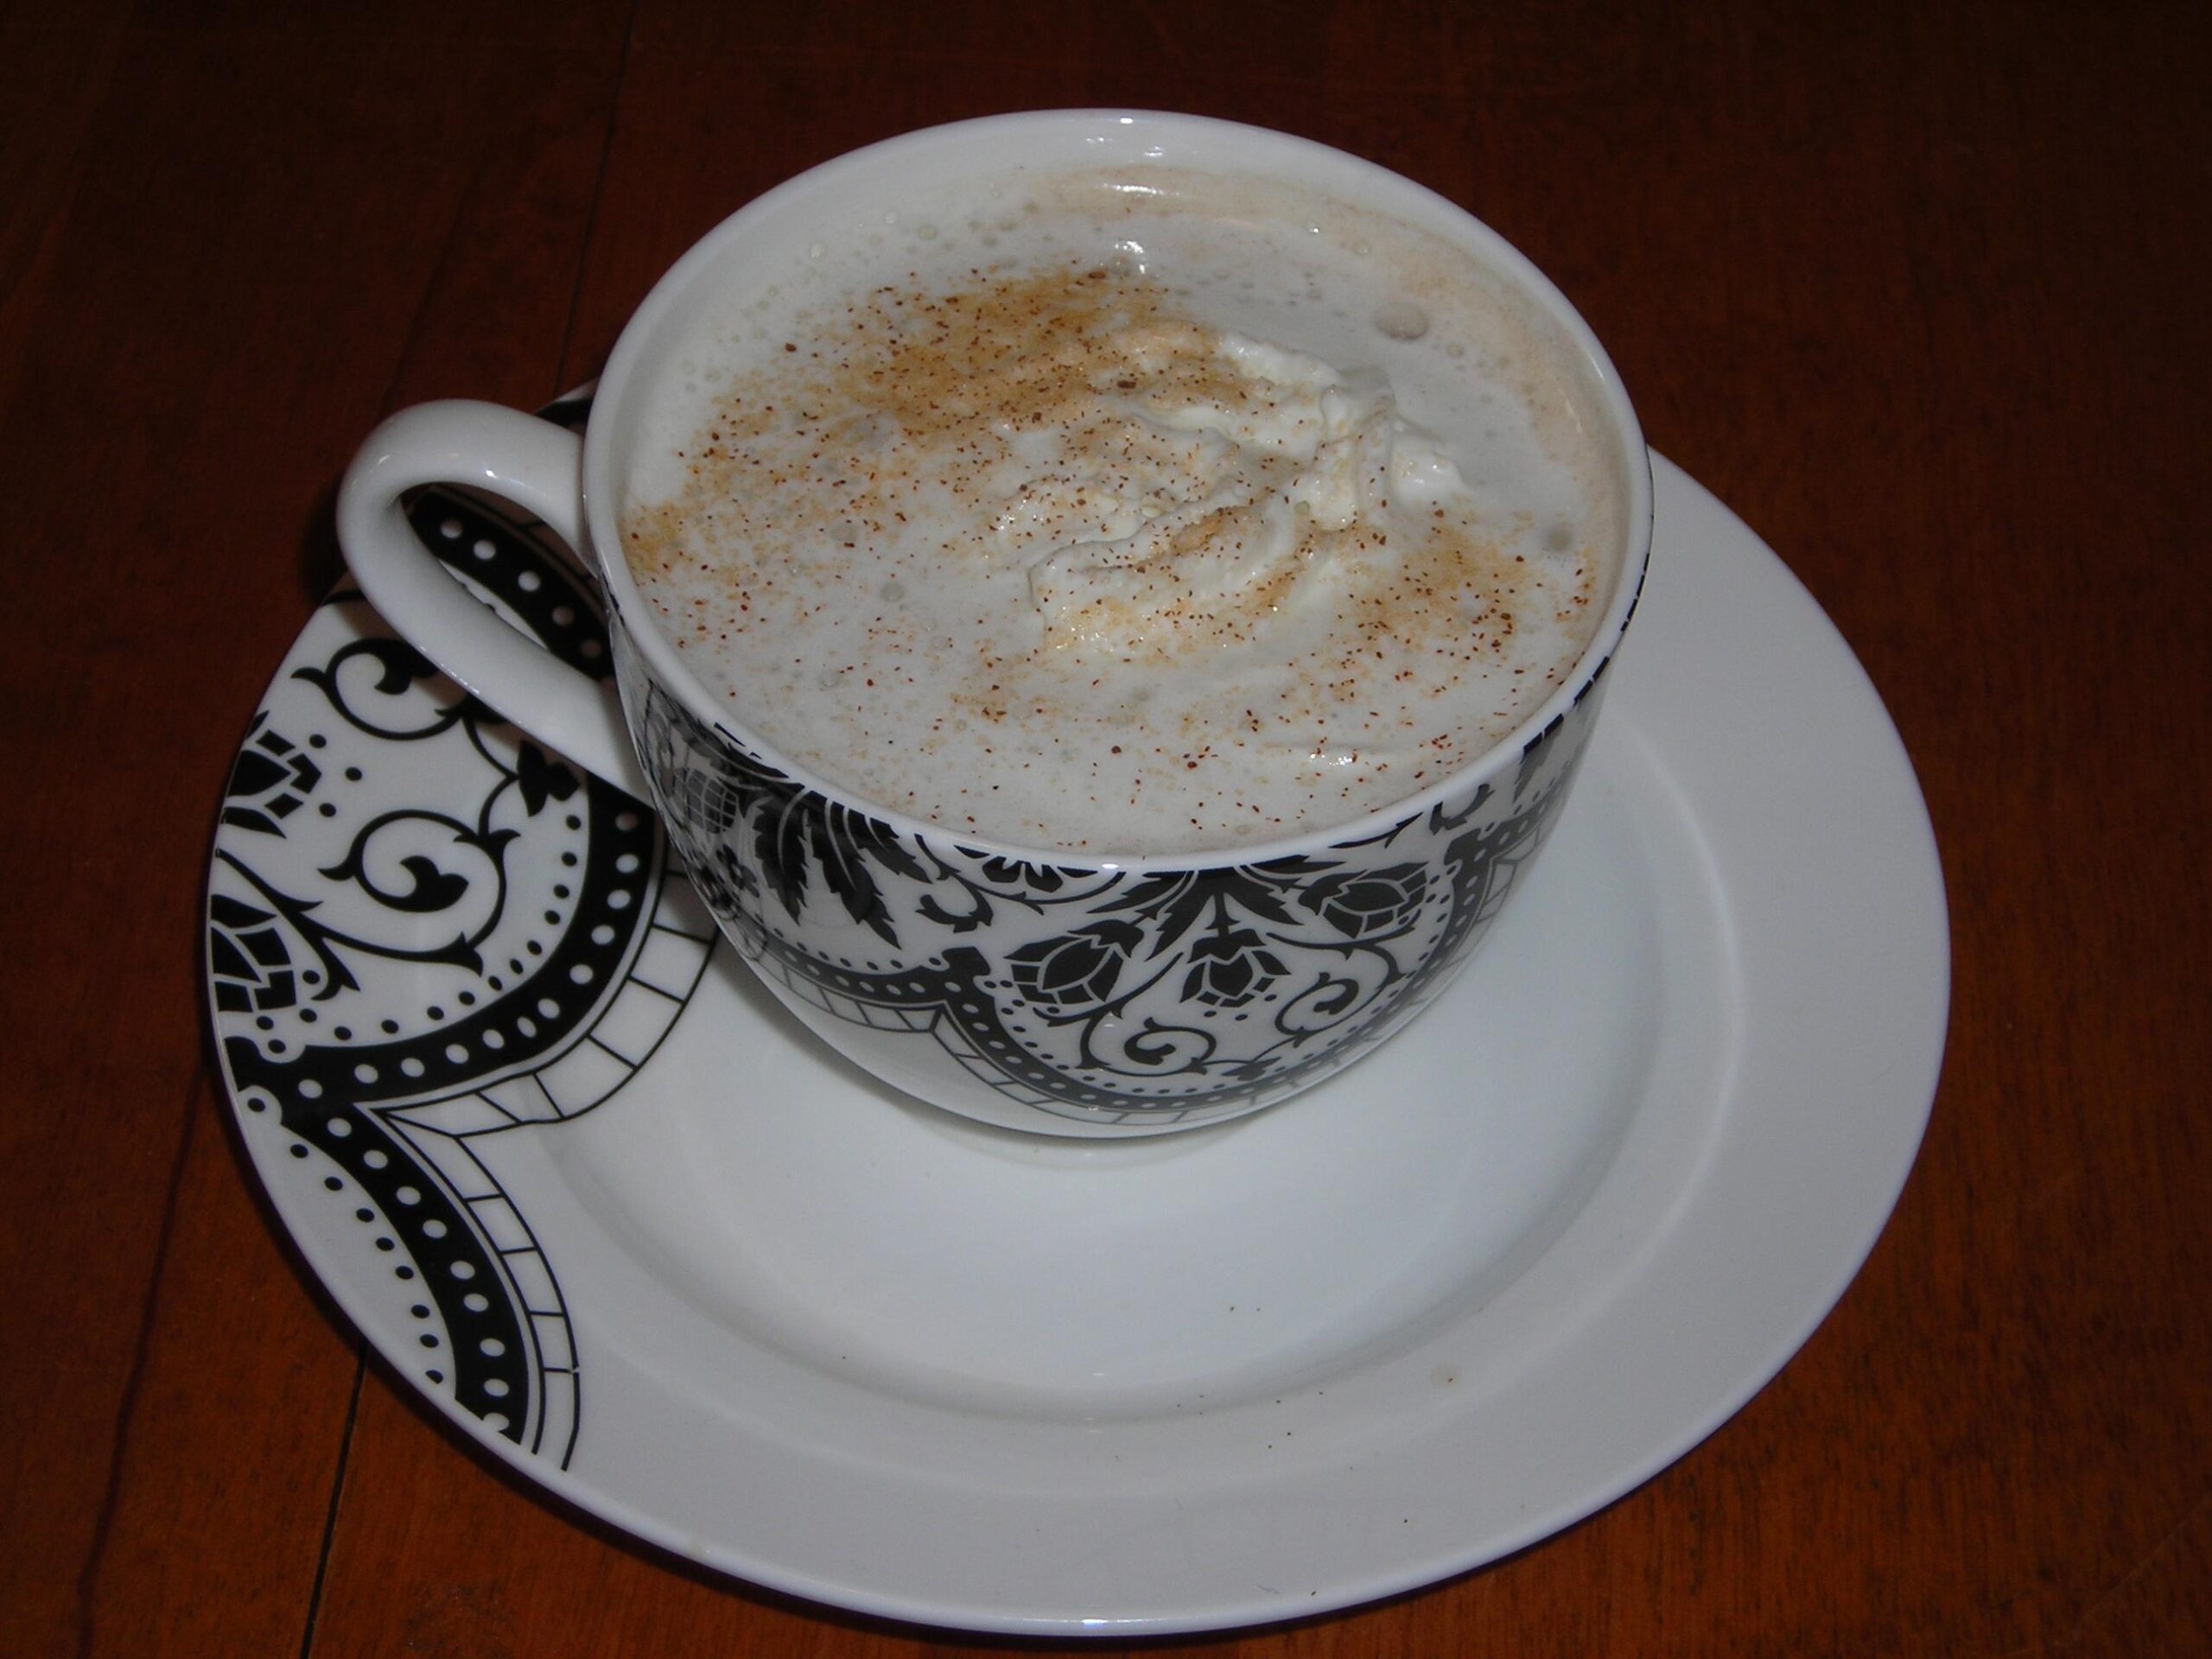  Start your day on a cozy note with this comforting cup of joe